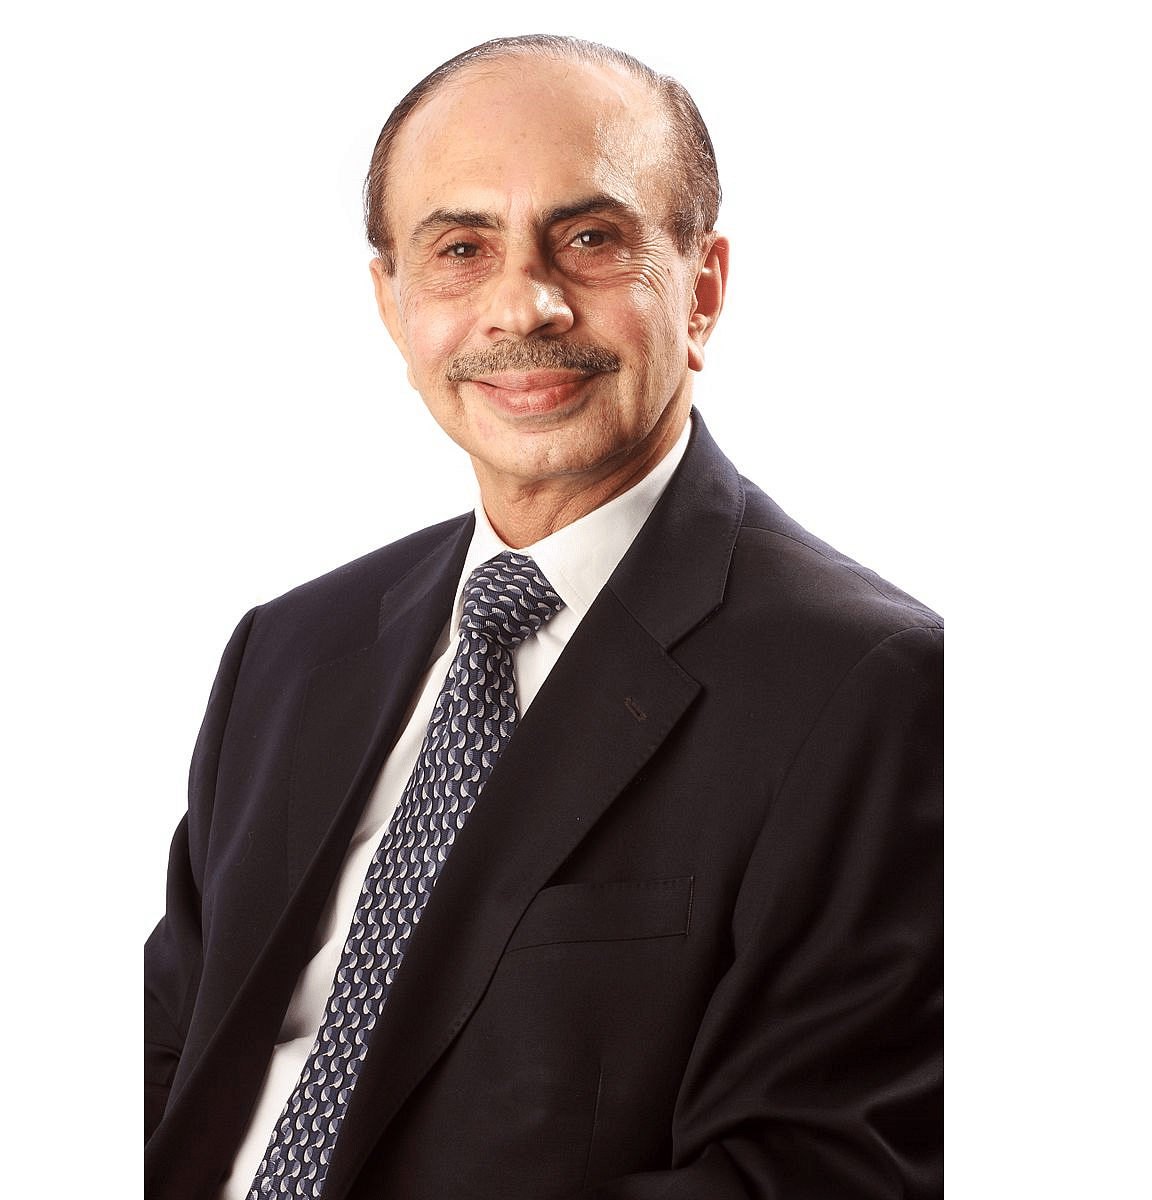 Lower personal tax, give more stimulus: Godrej to govt